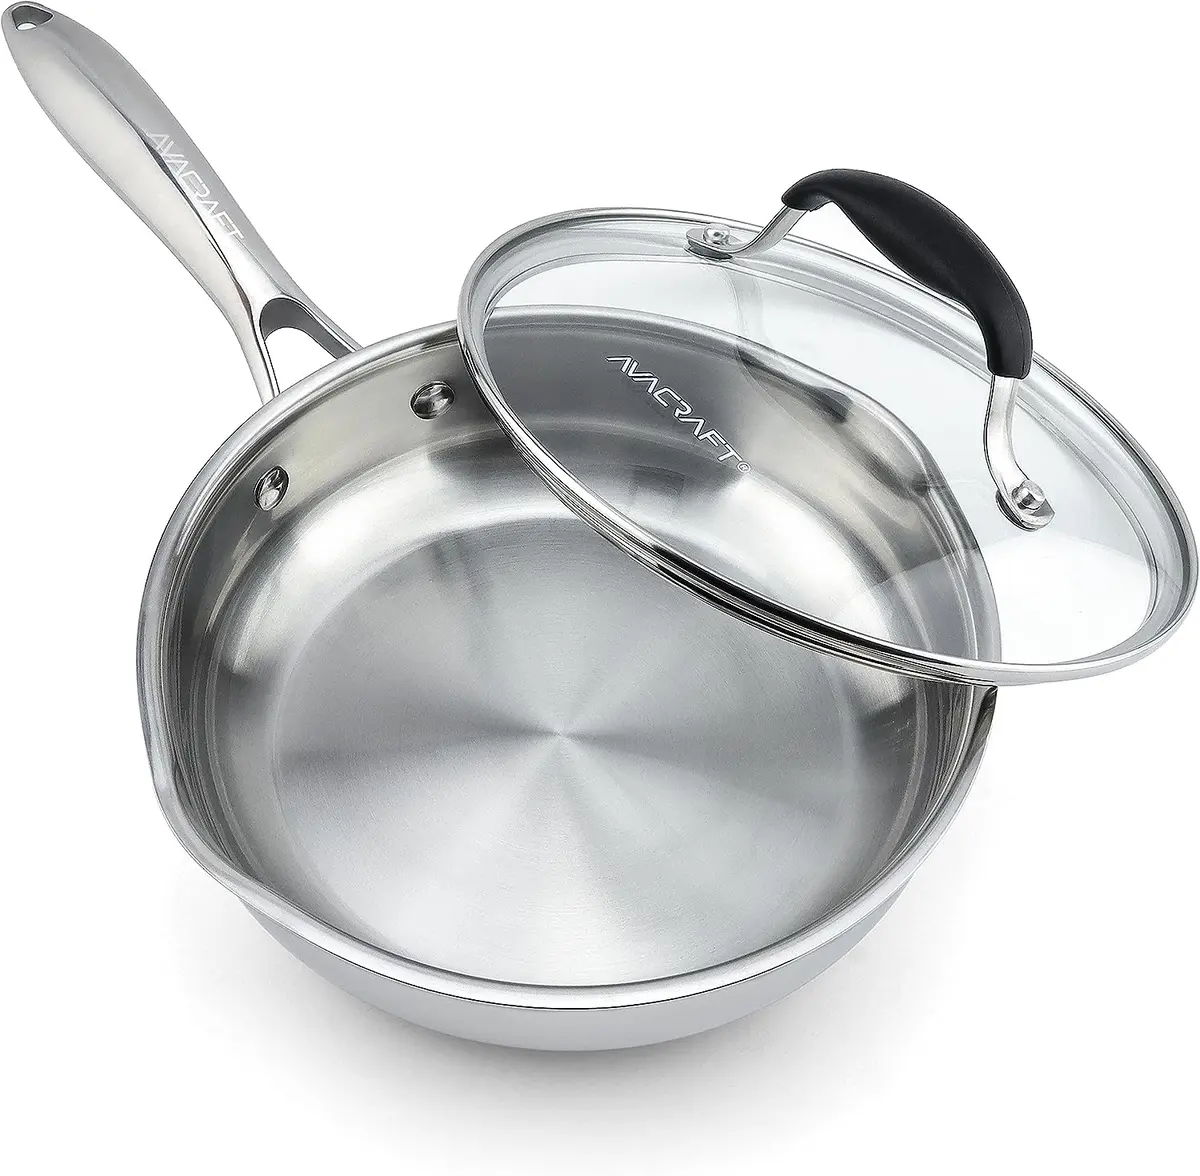 8 Inch Tri-Ply Stainless Steel Frying Pan with Lid, Side Spouts